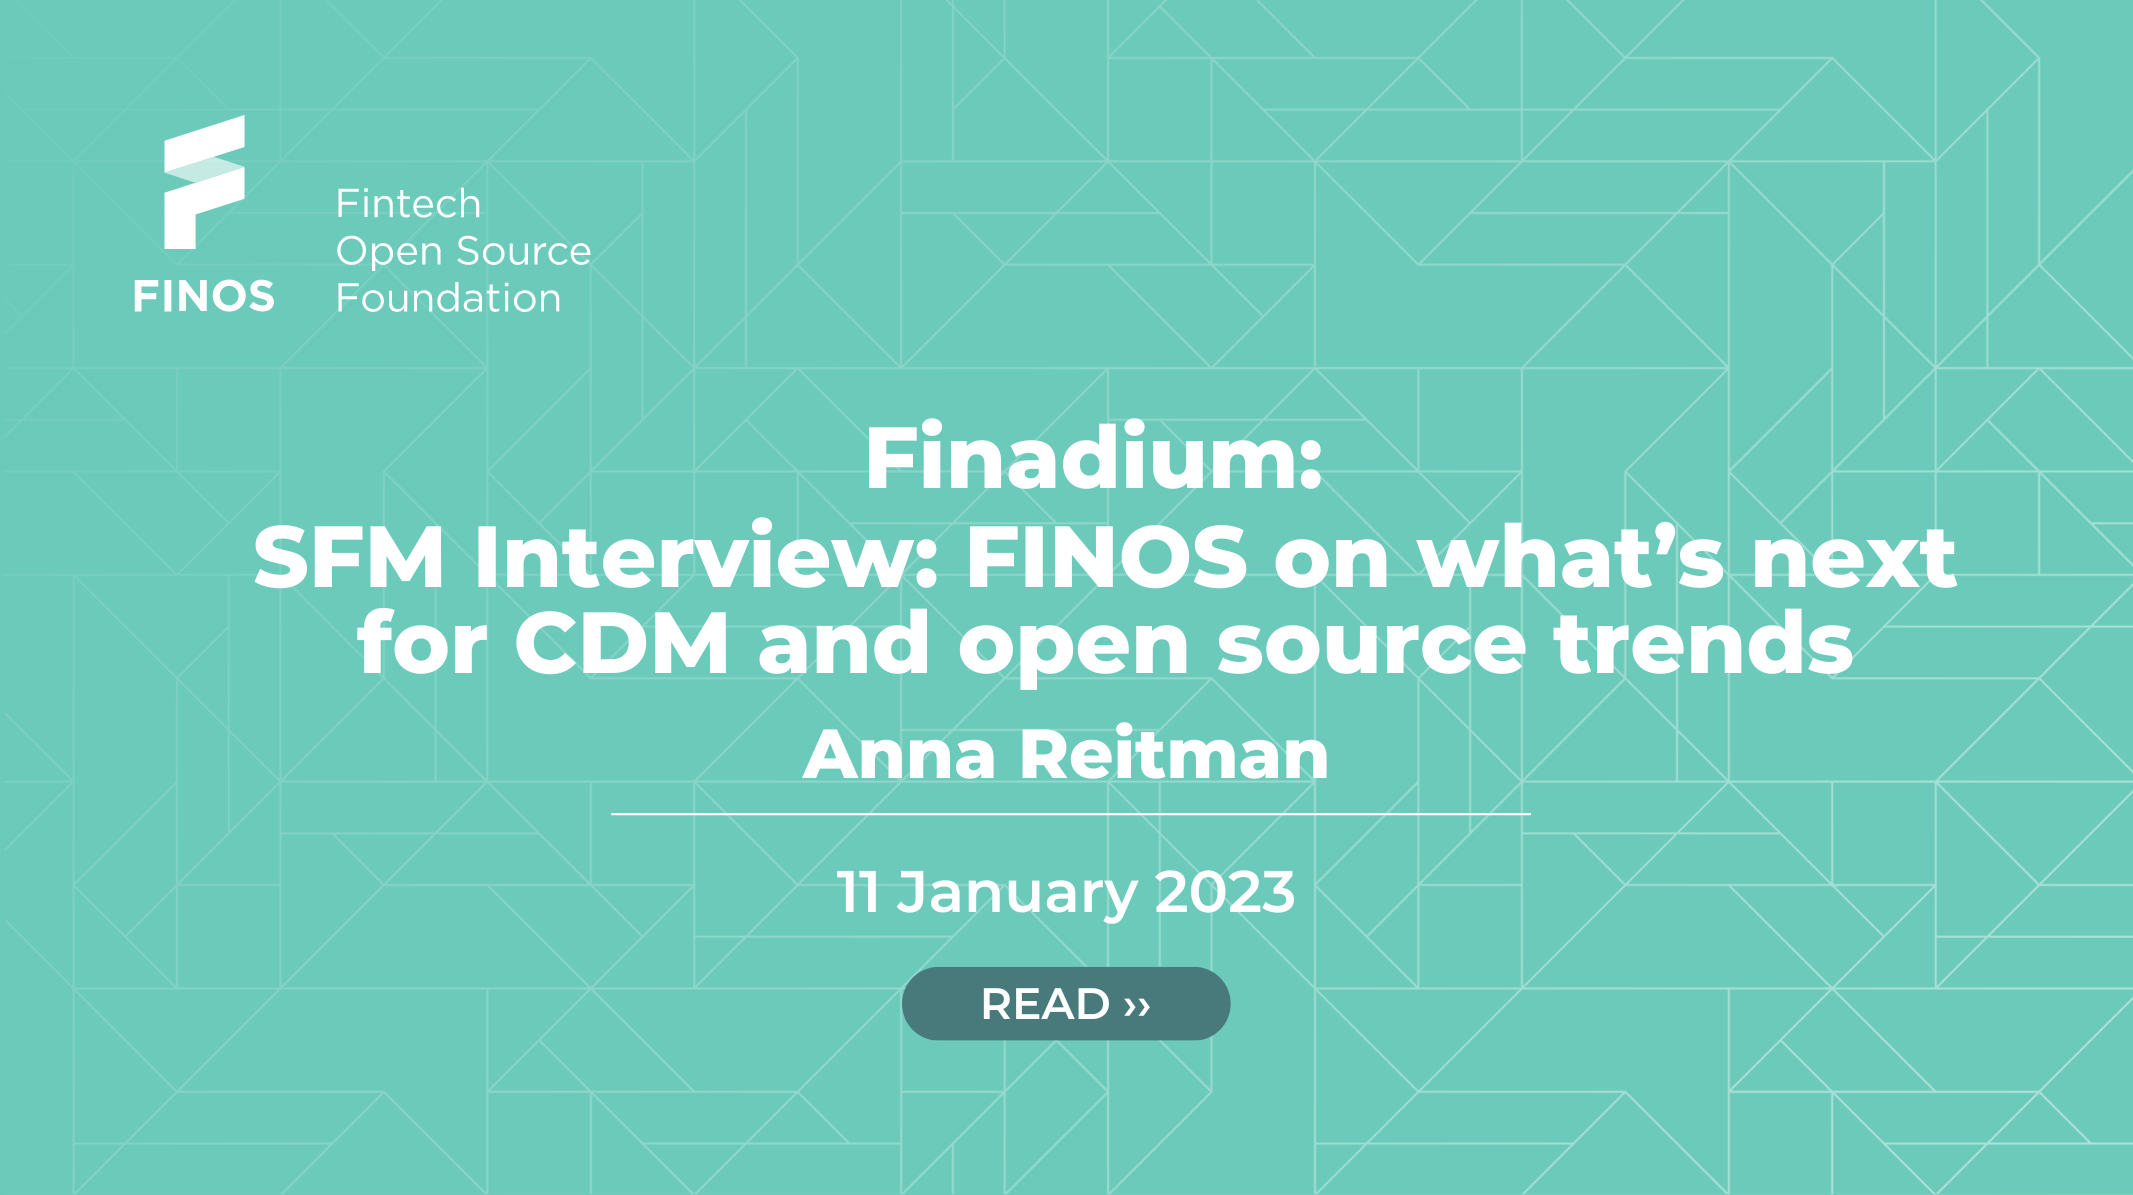 Finadium: SFM Interview: FINOS on what's next for CDM & open source trends